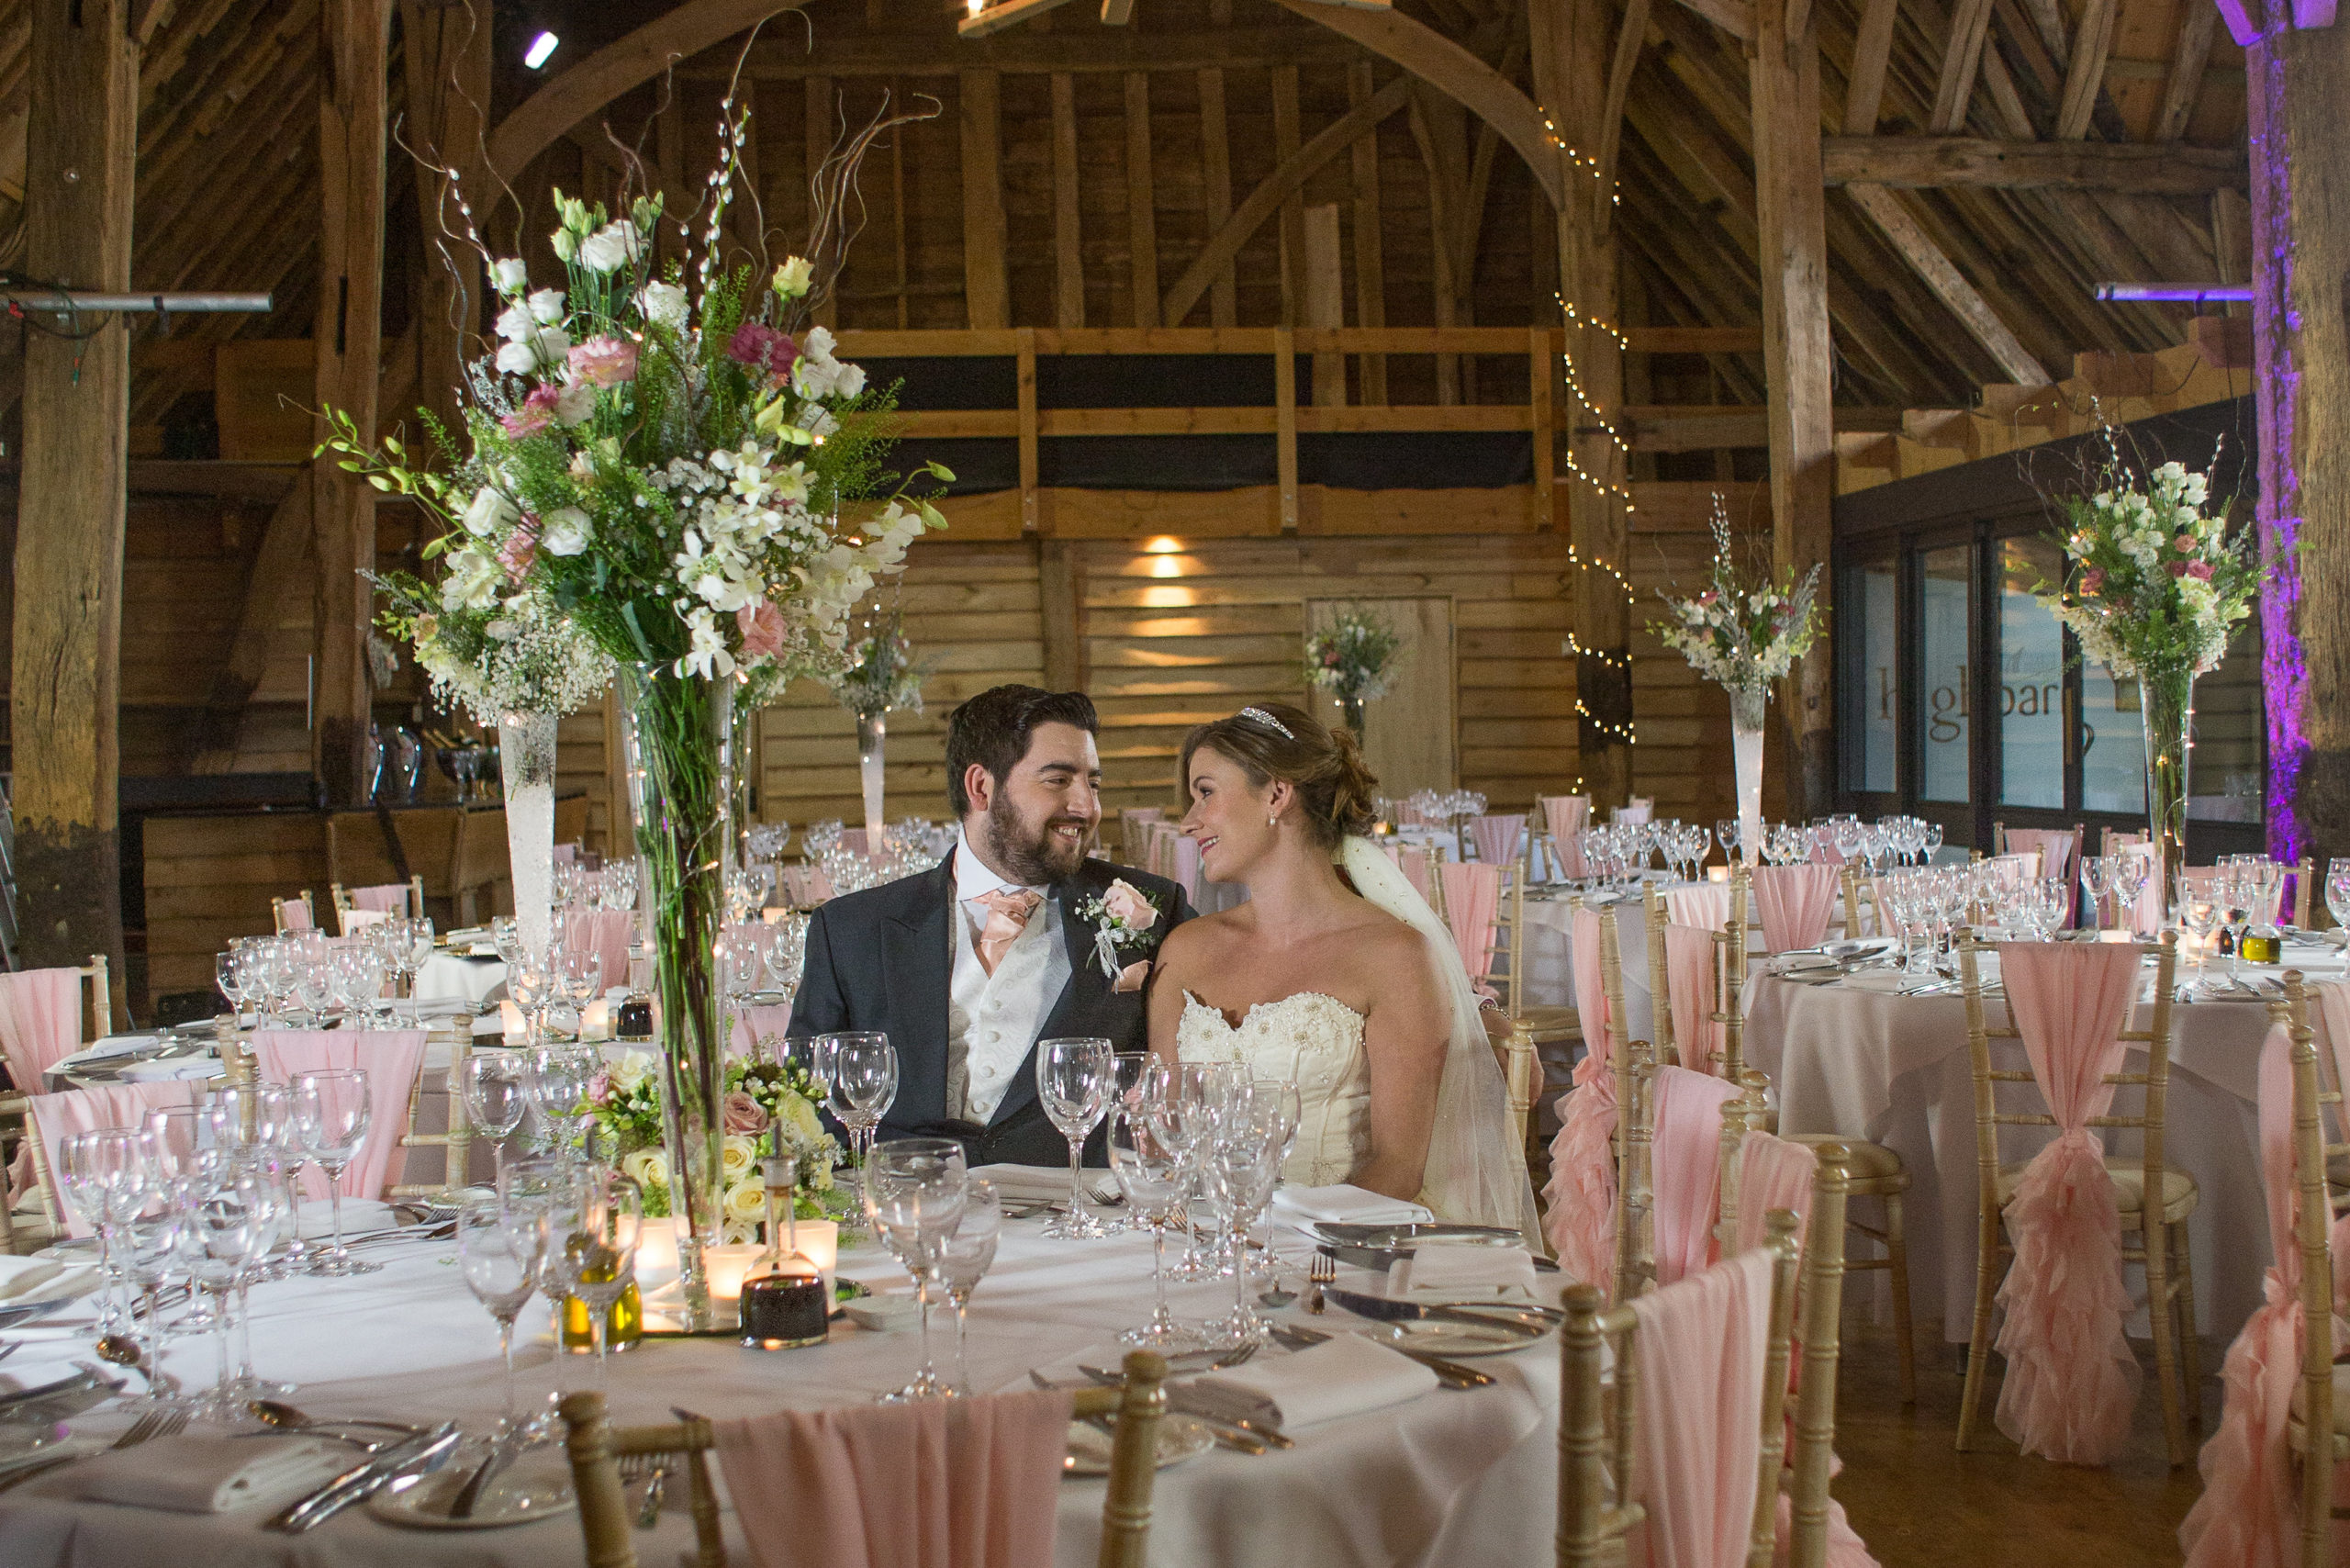 Why People Prefer To Choose Barn Wedding Venues For Their Special Day